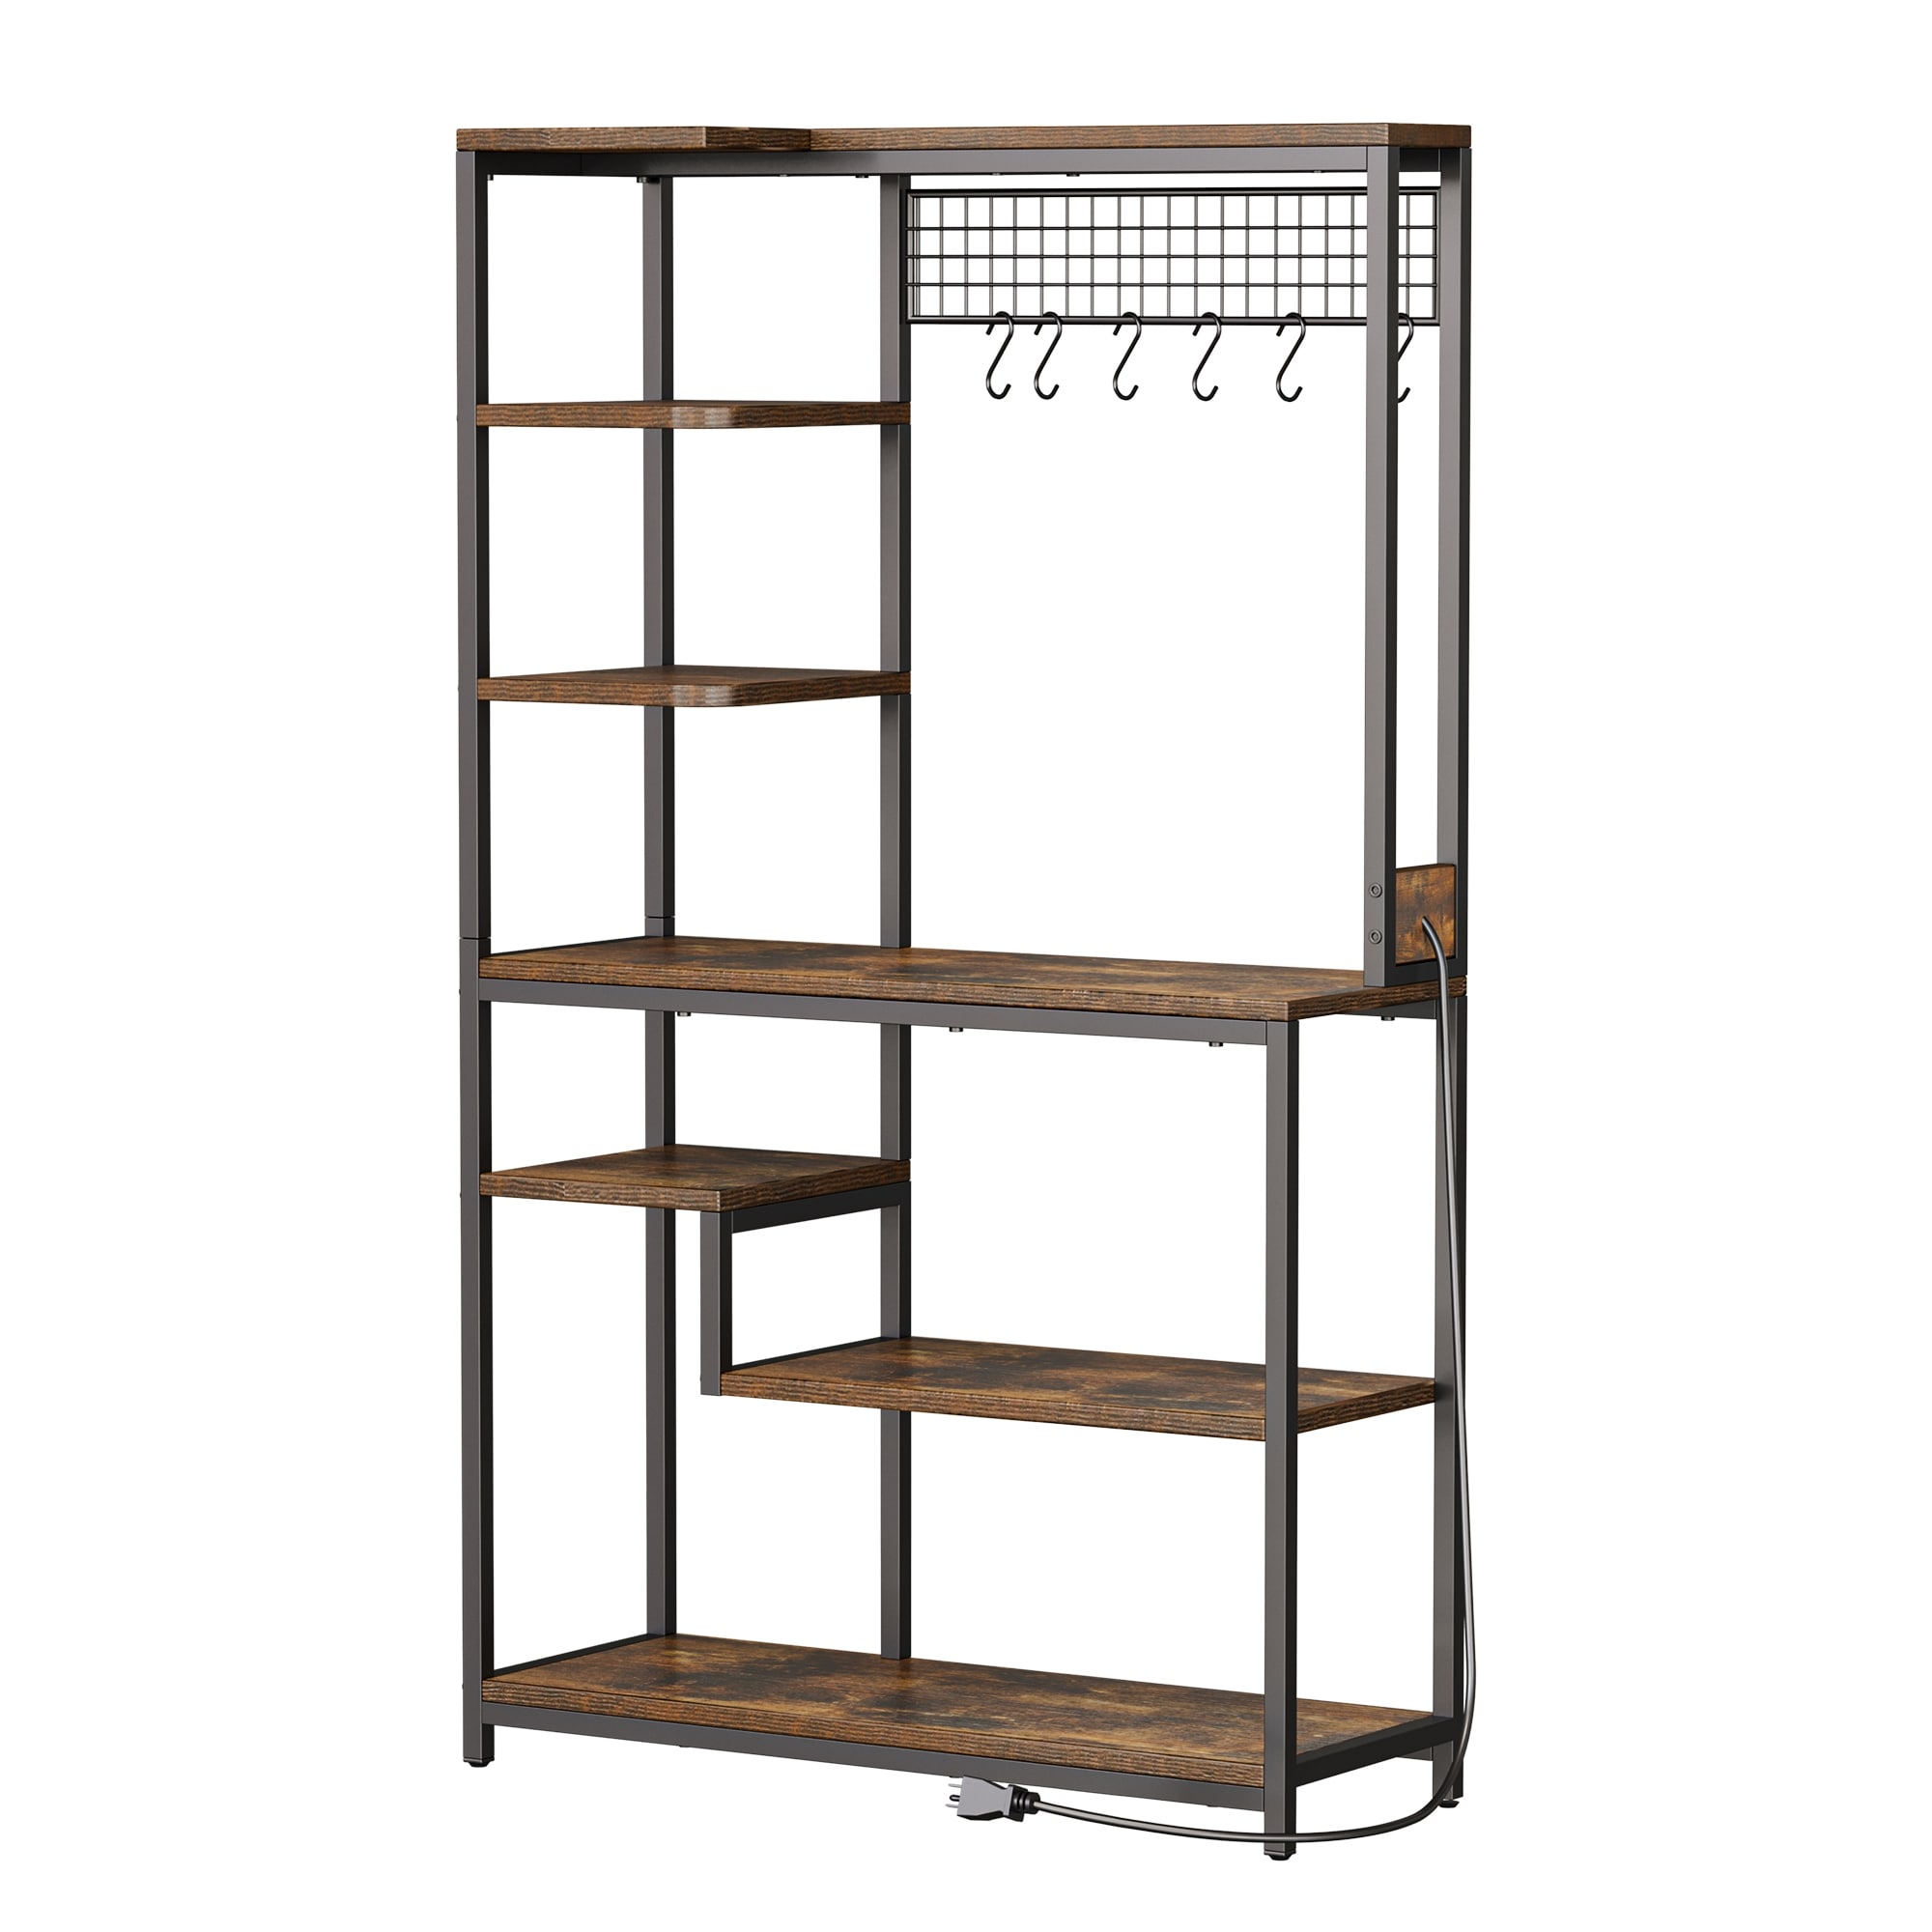 Moasis Kitchen Microwave Stand Bakers Rack Utility Storage Shelf with Power Outlet